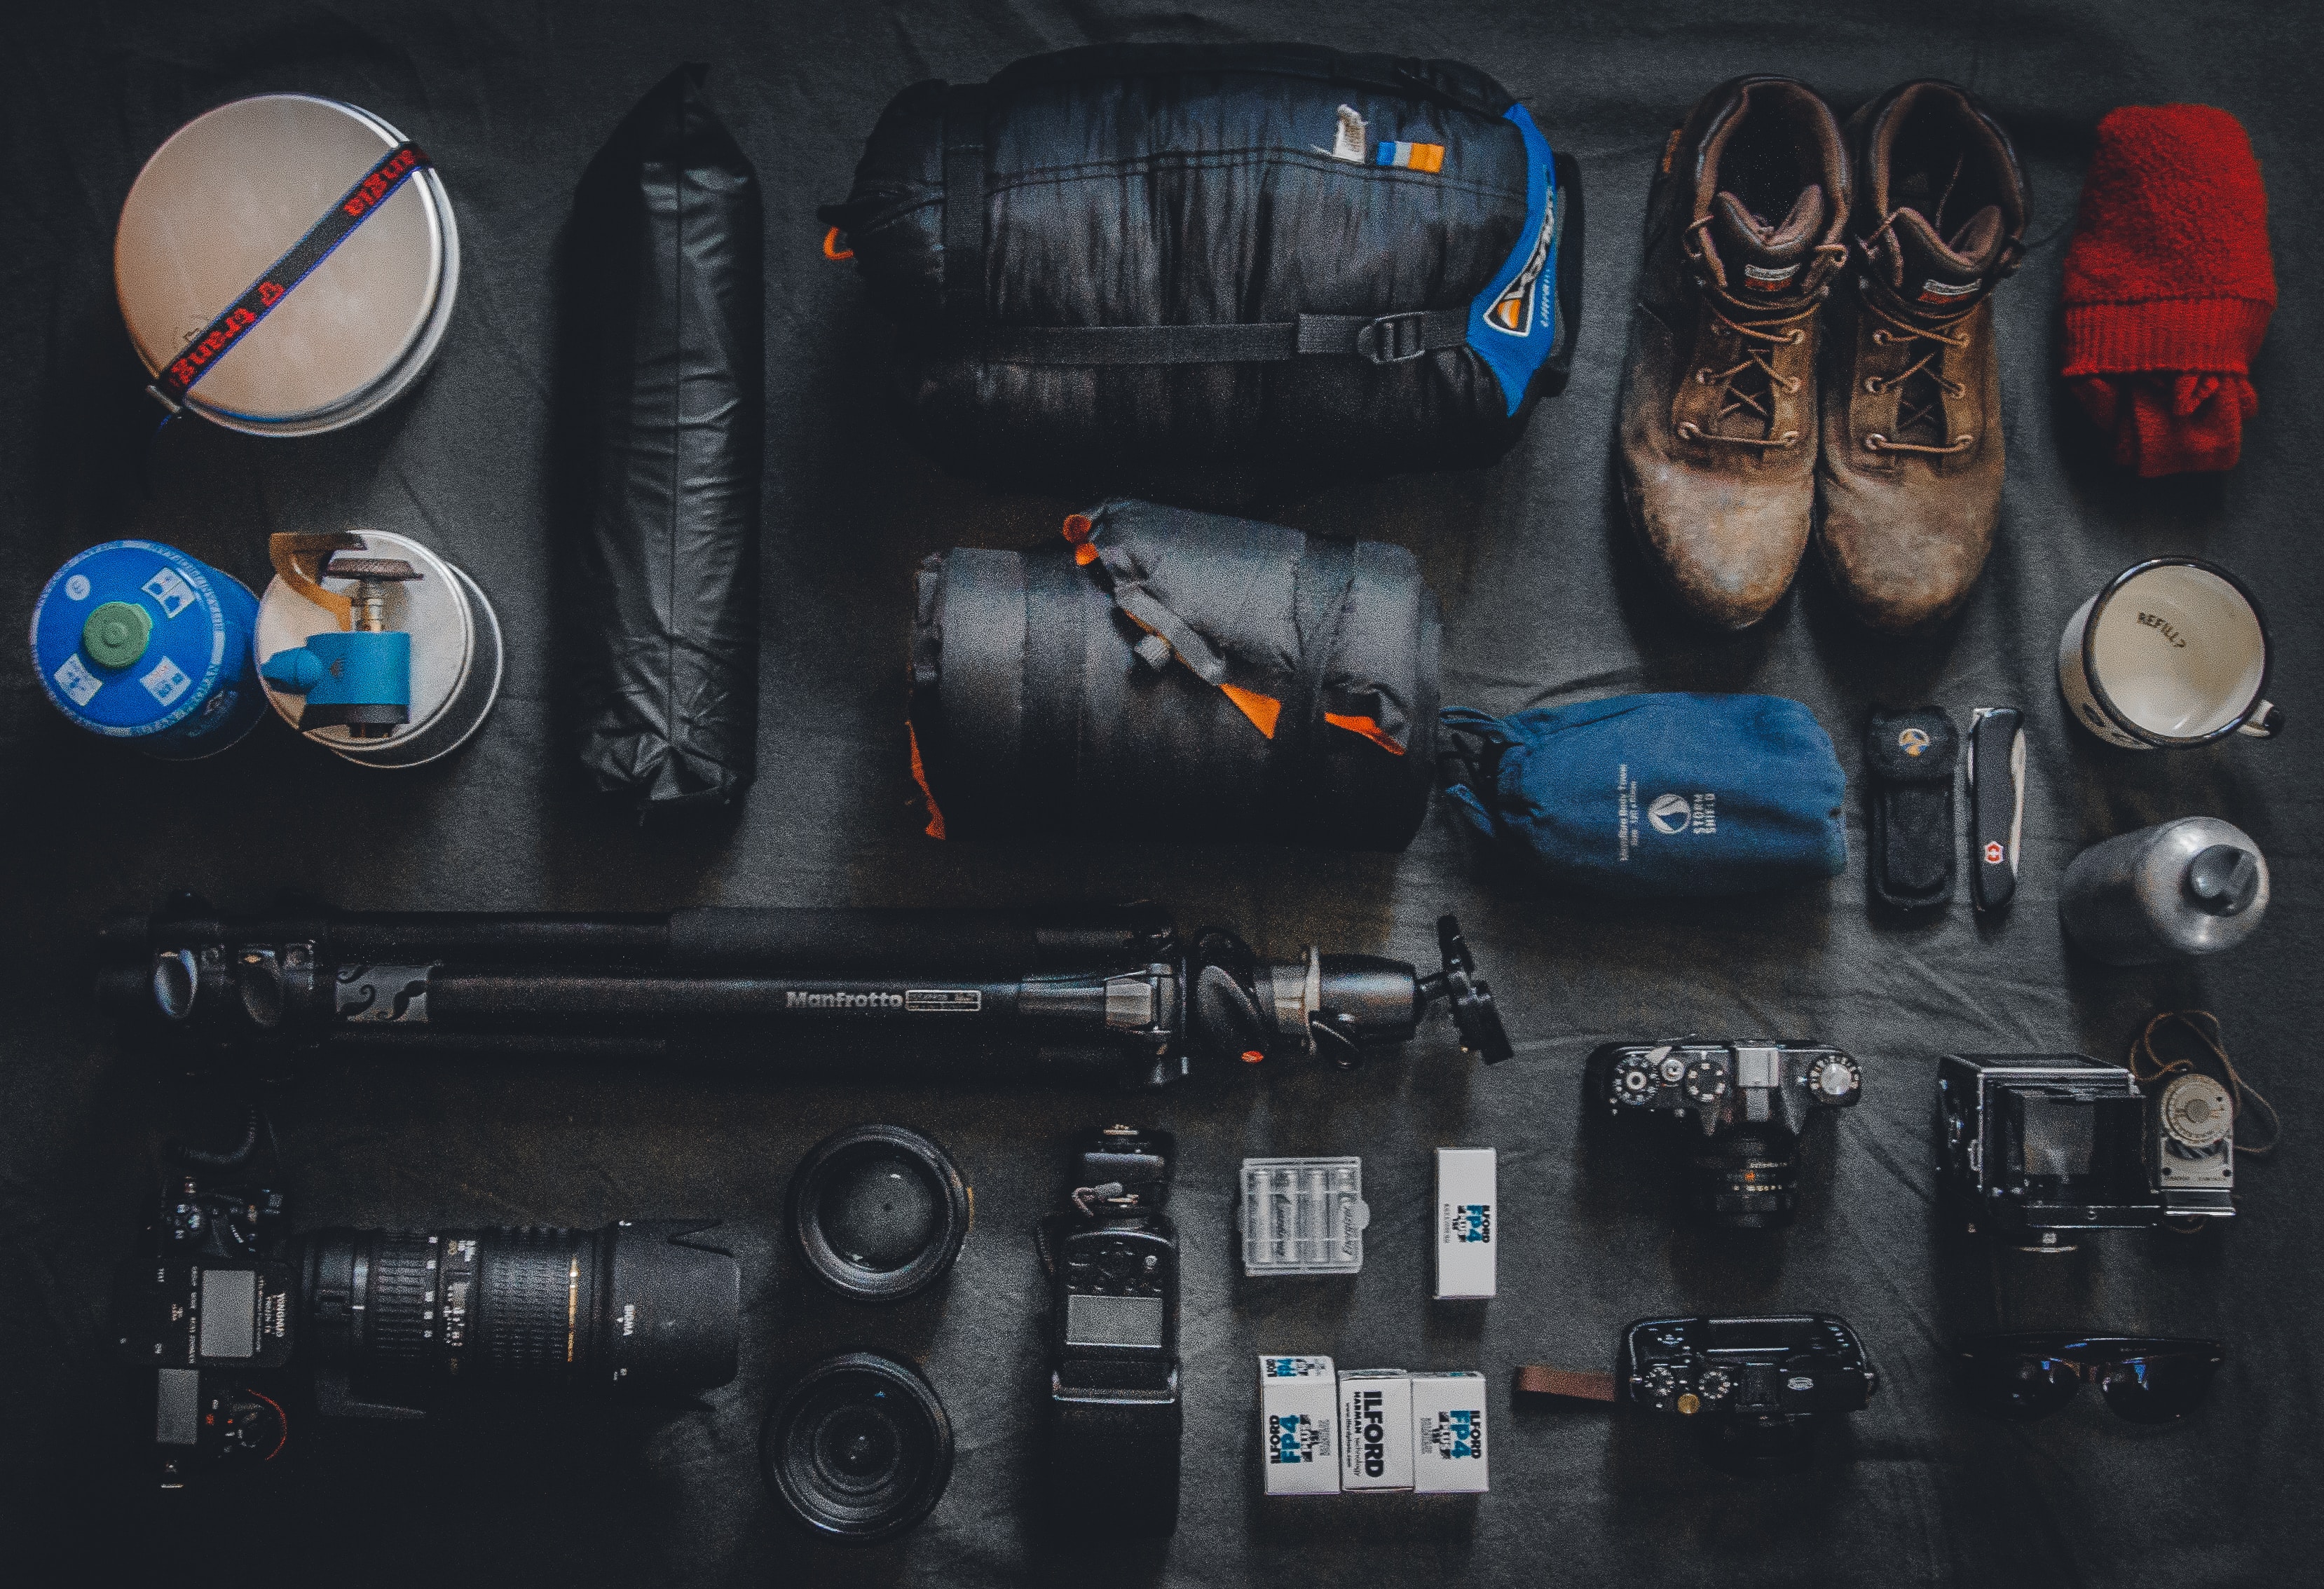 Trekking Photography: Gear & Packing Tips from the Pros